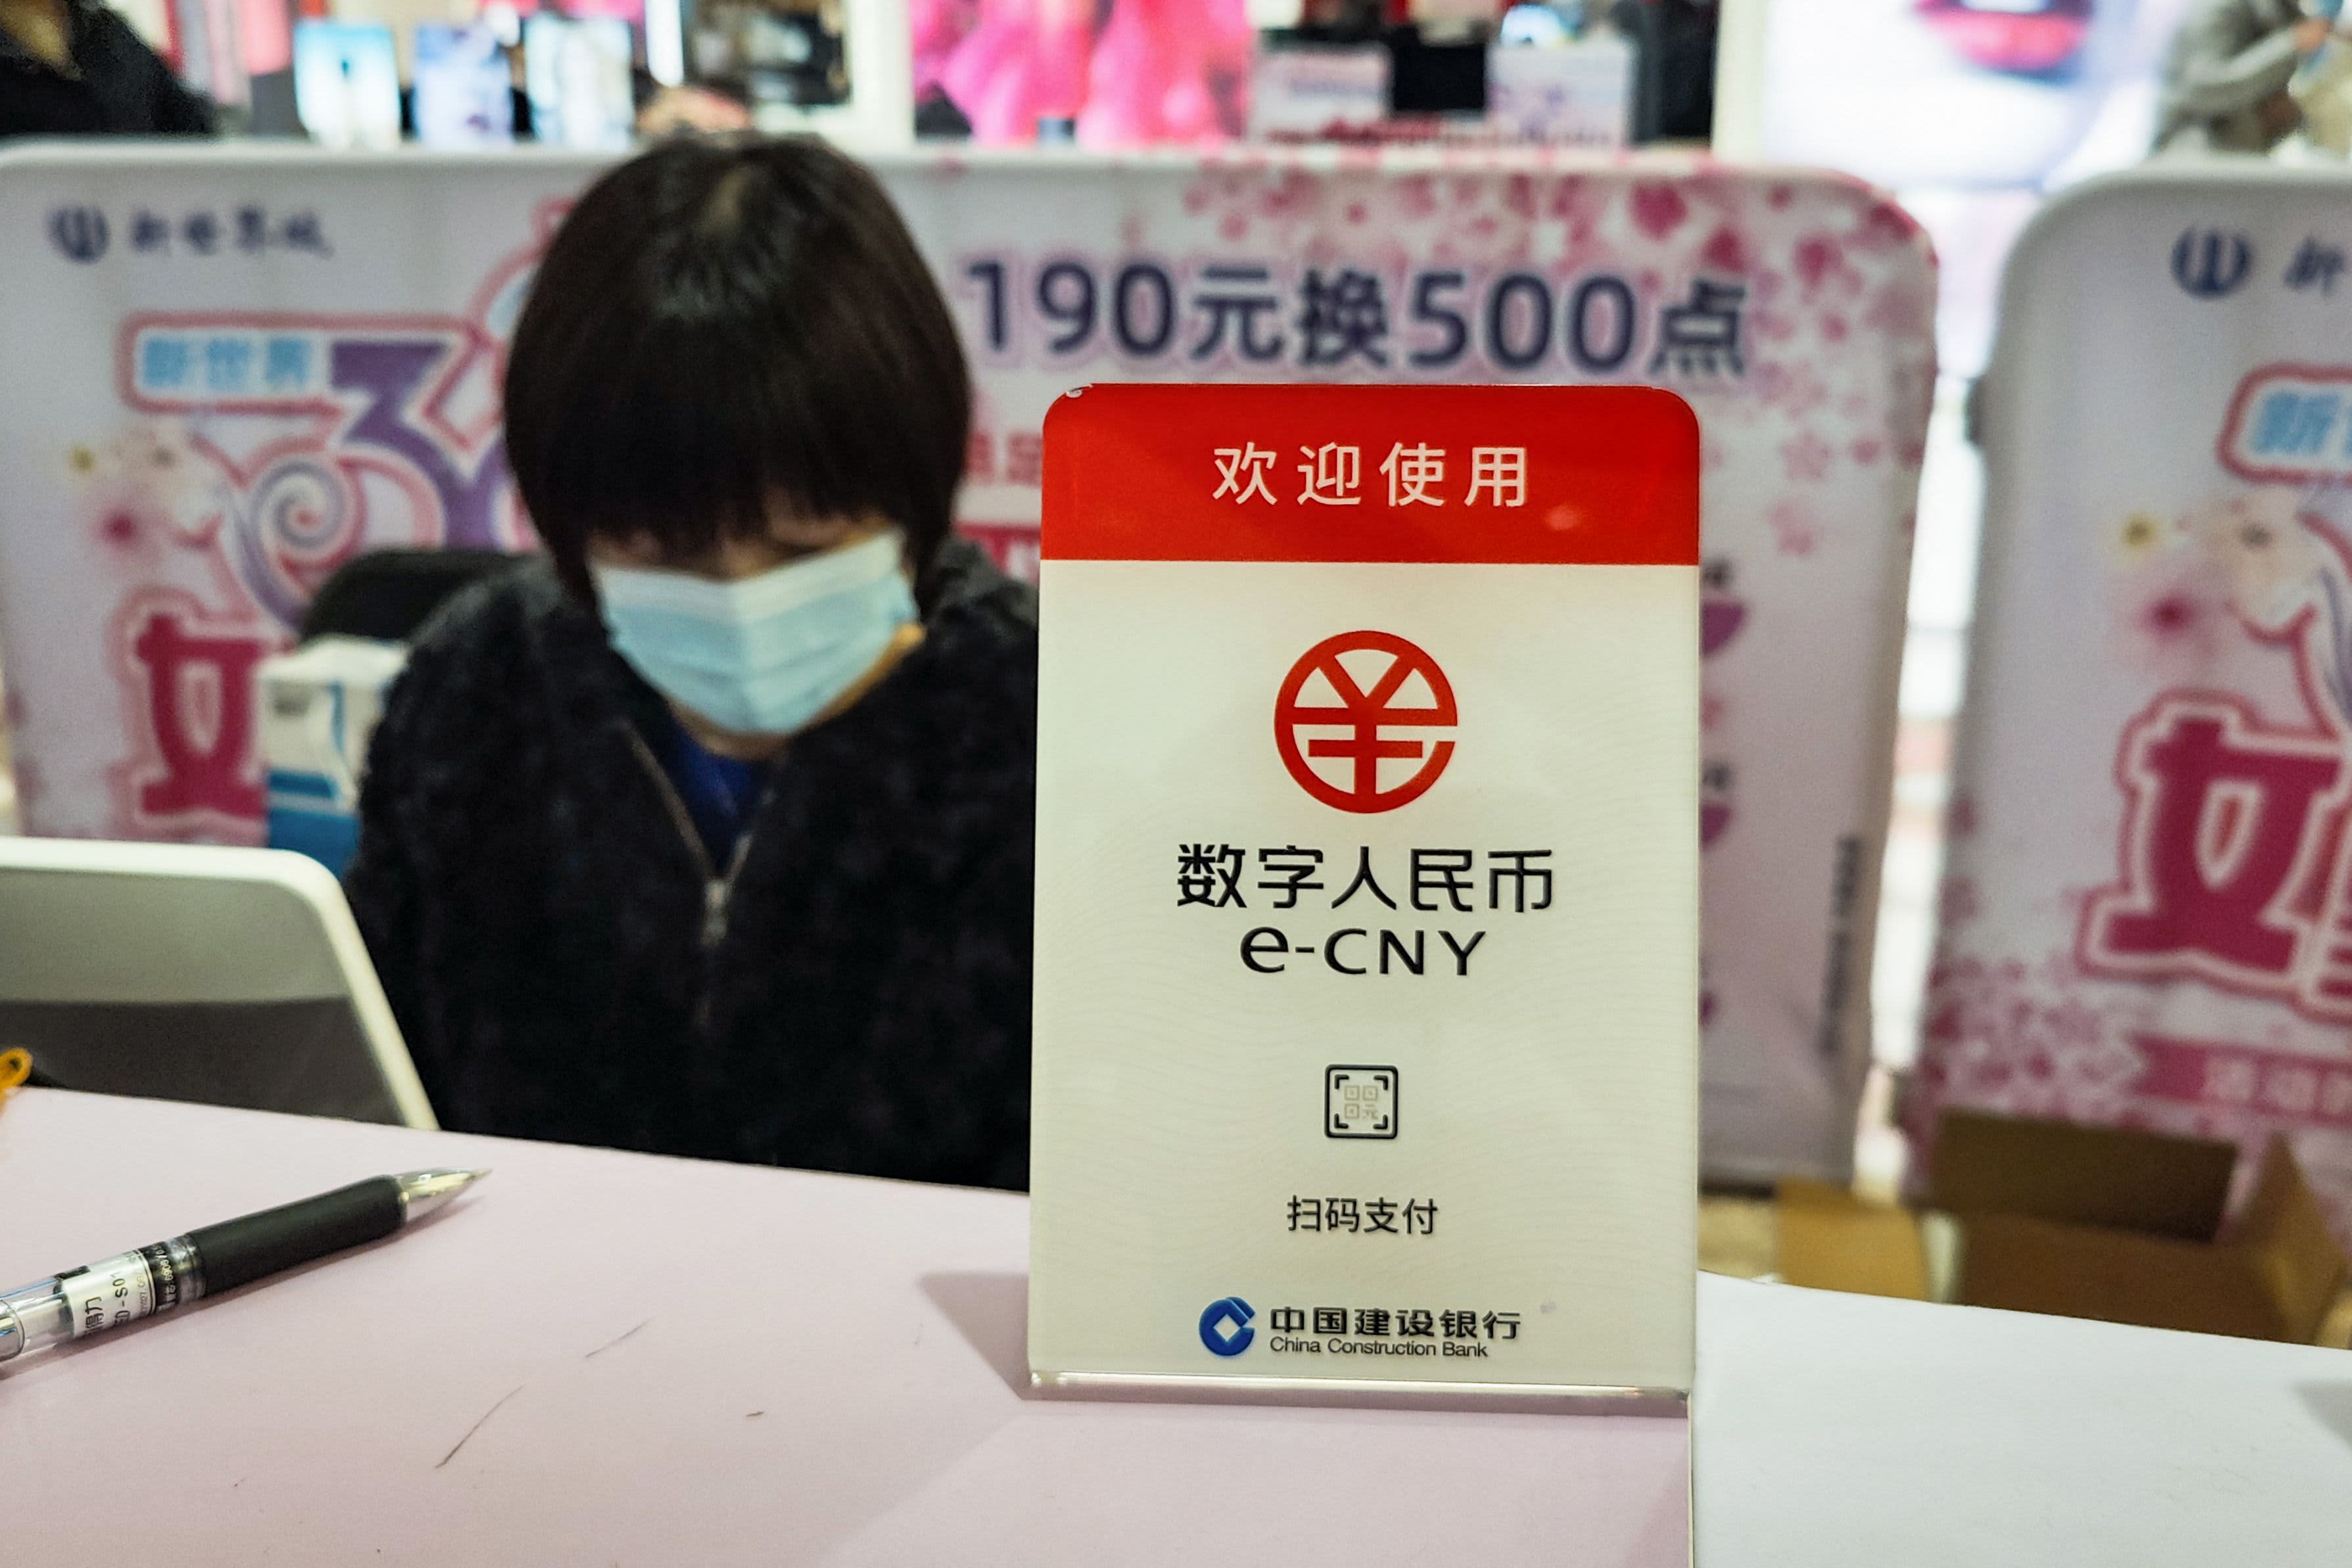 China's digital yuan notches $8.3 billion in transactions in 6 months — a tiny share of payments